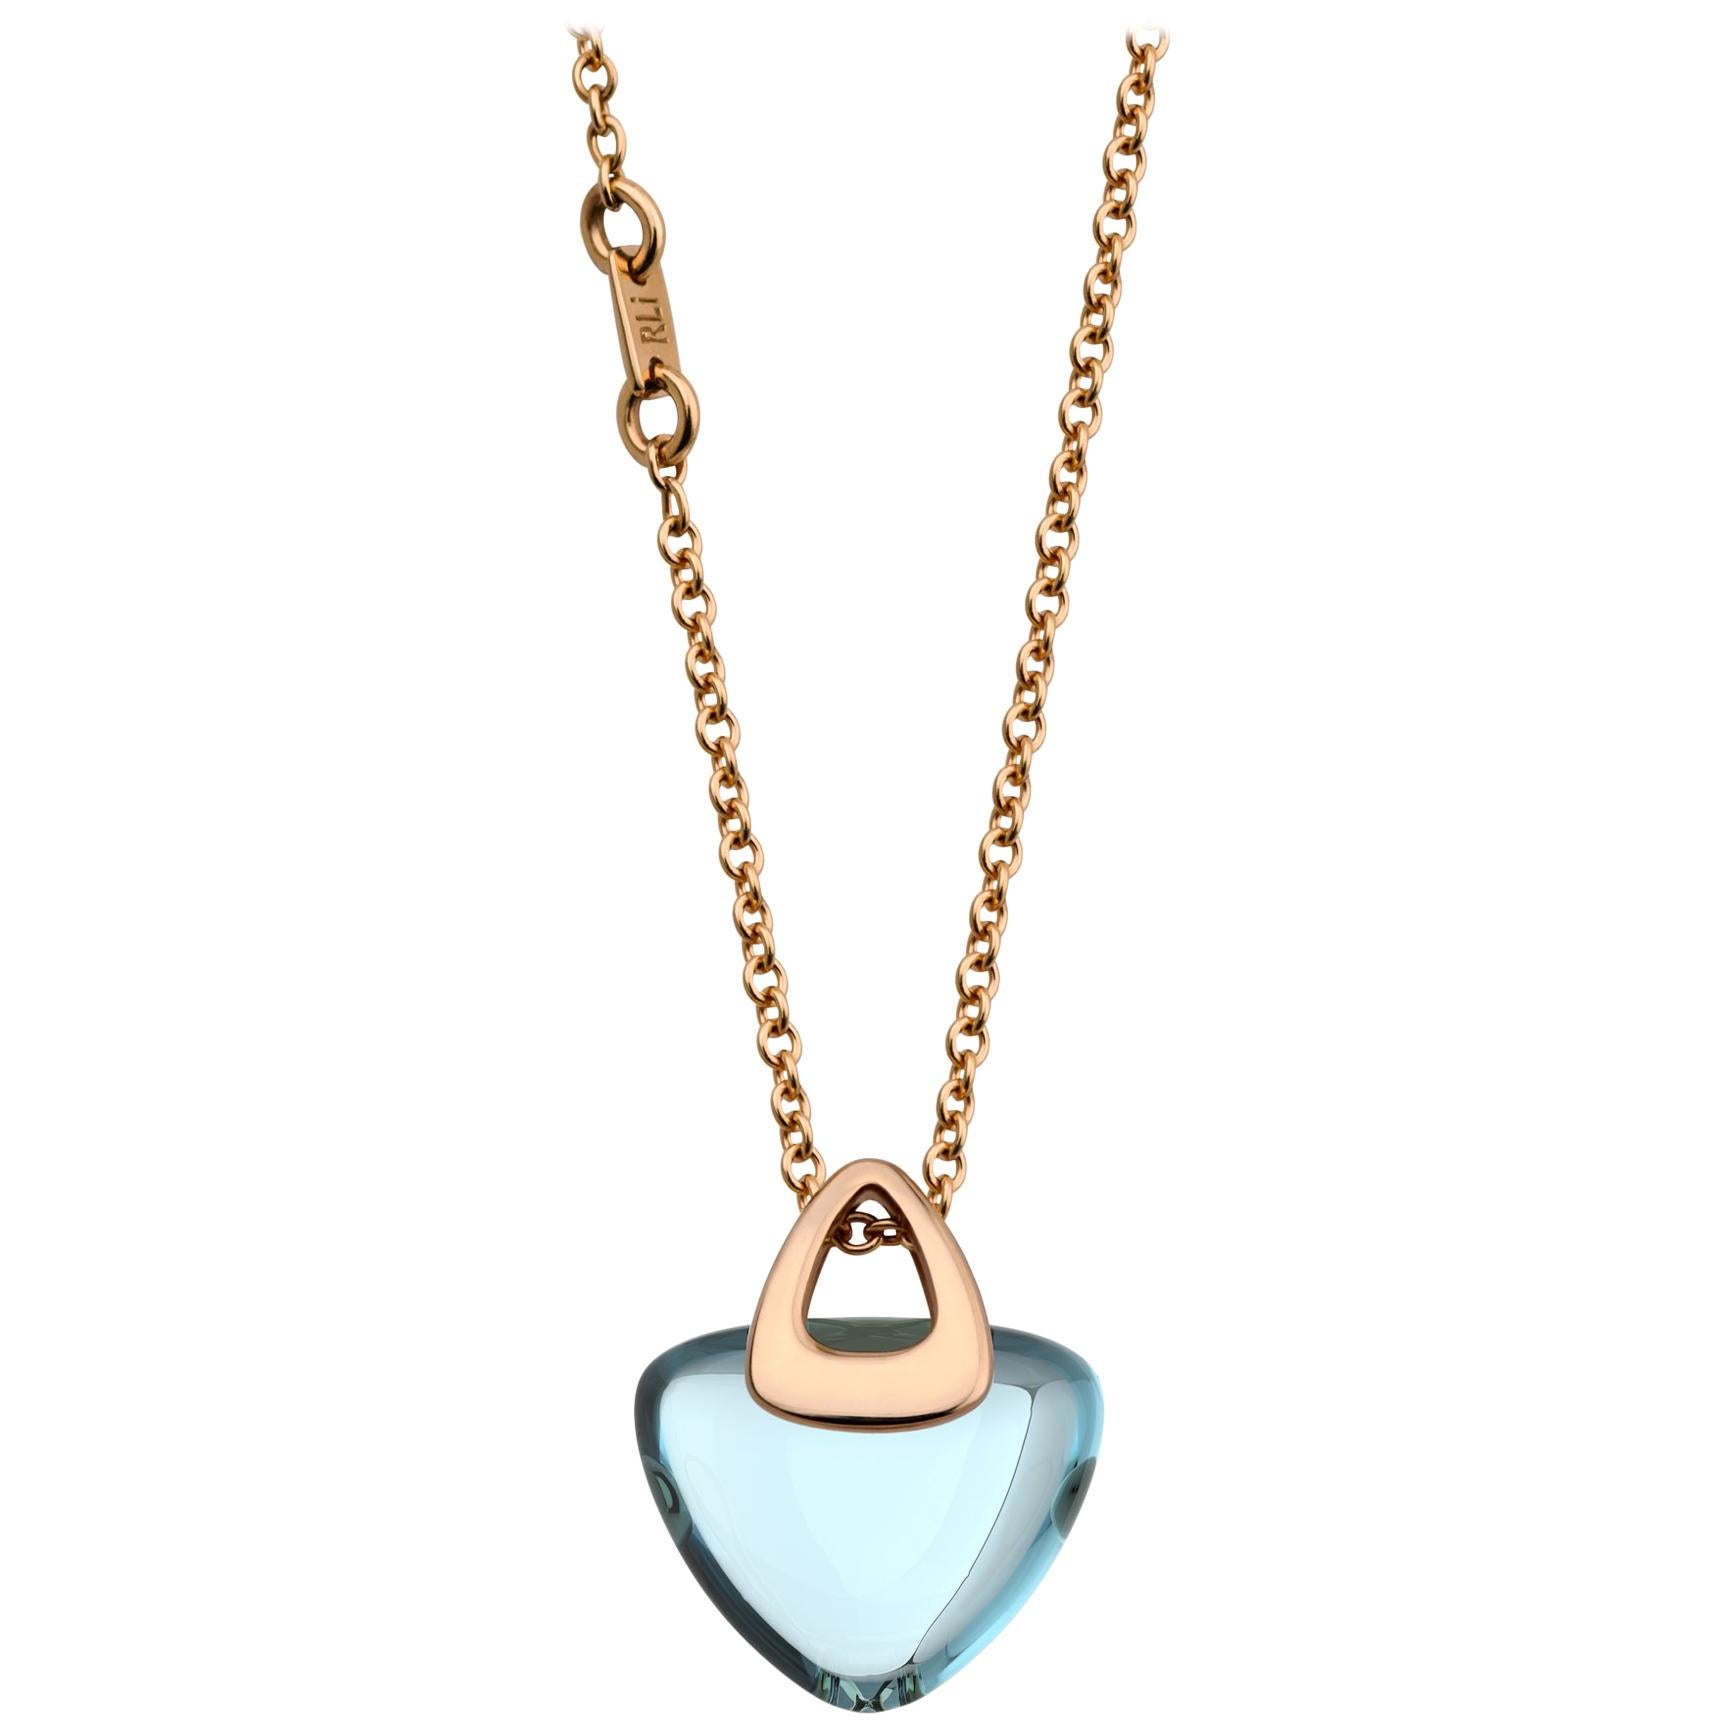 Modern Geometrical Triangle 18k Gold Luck Rock Necklace with Healing Blue Topaz